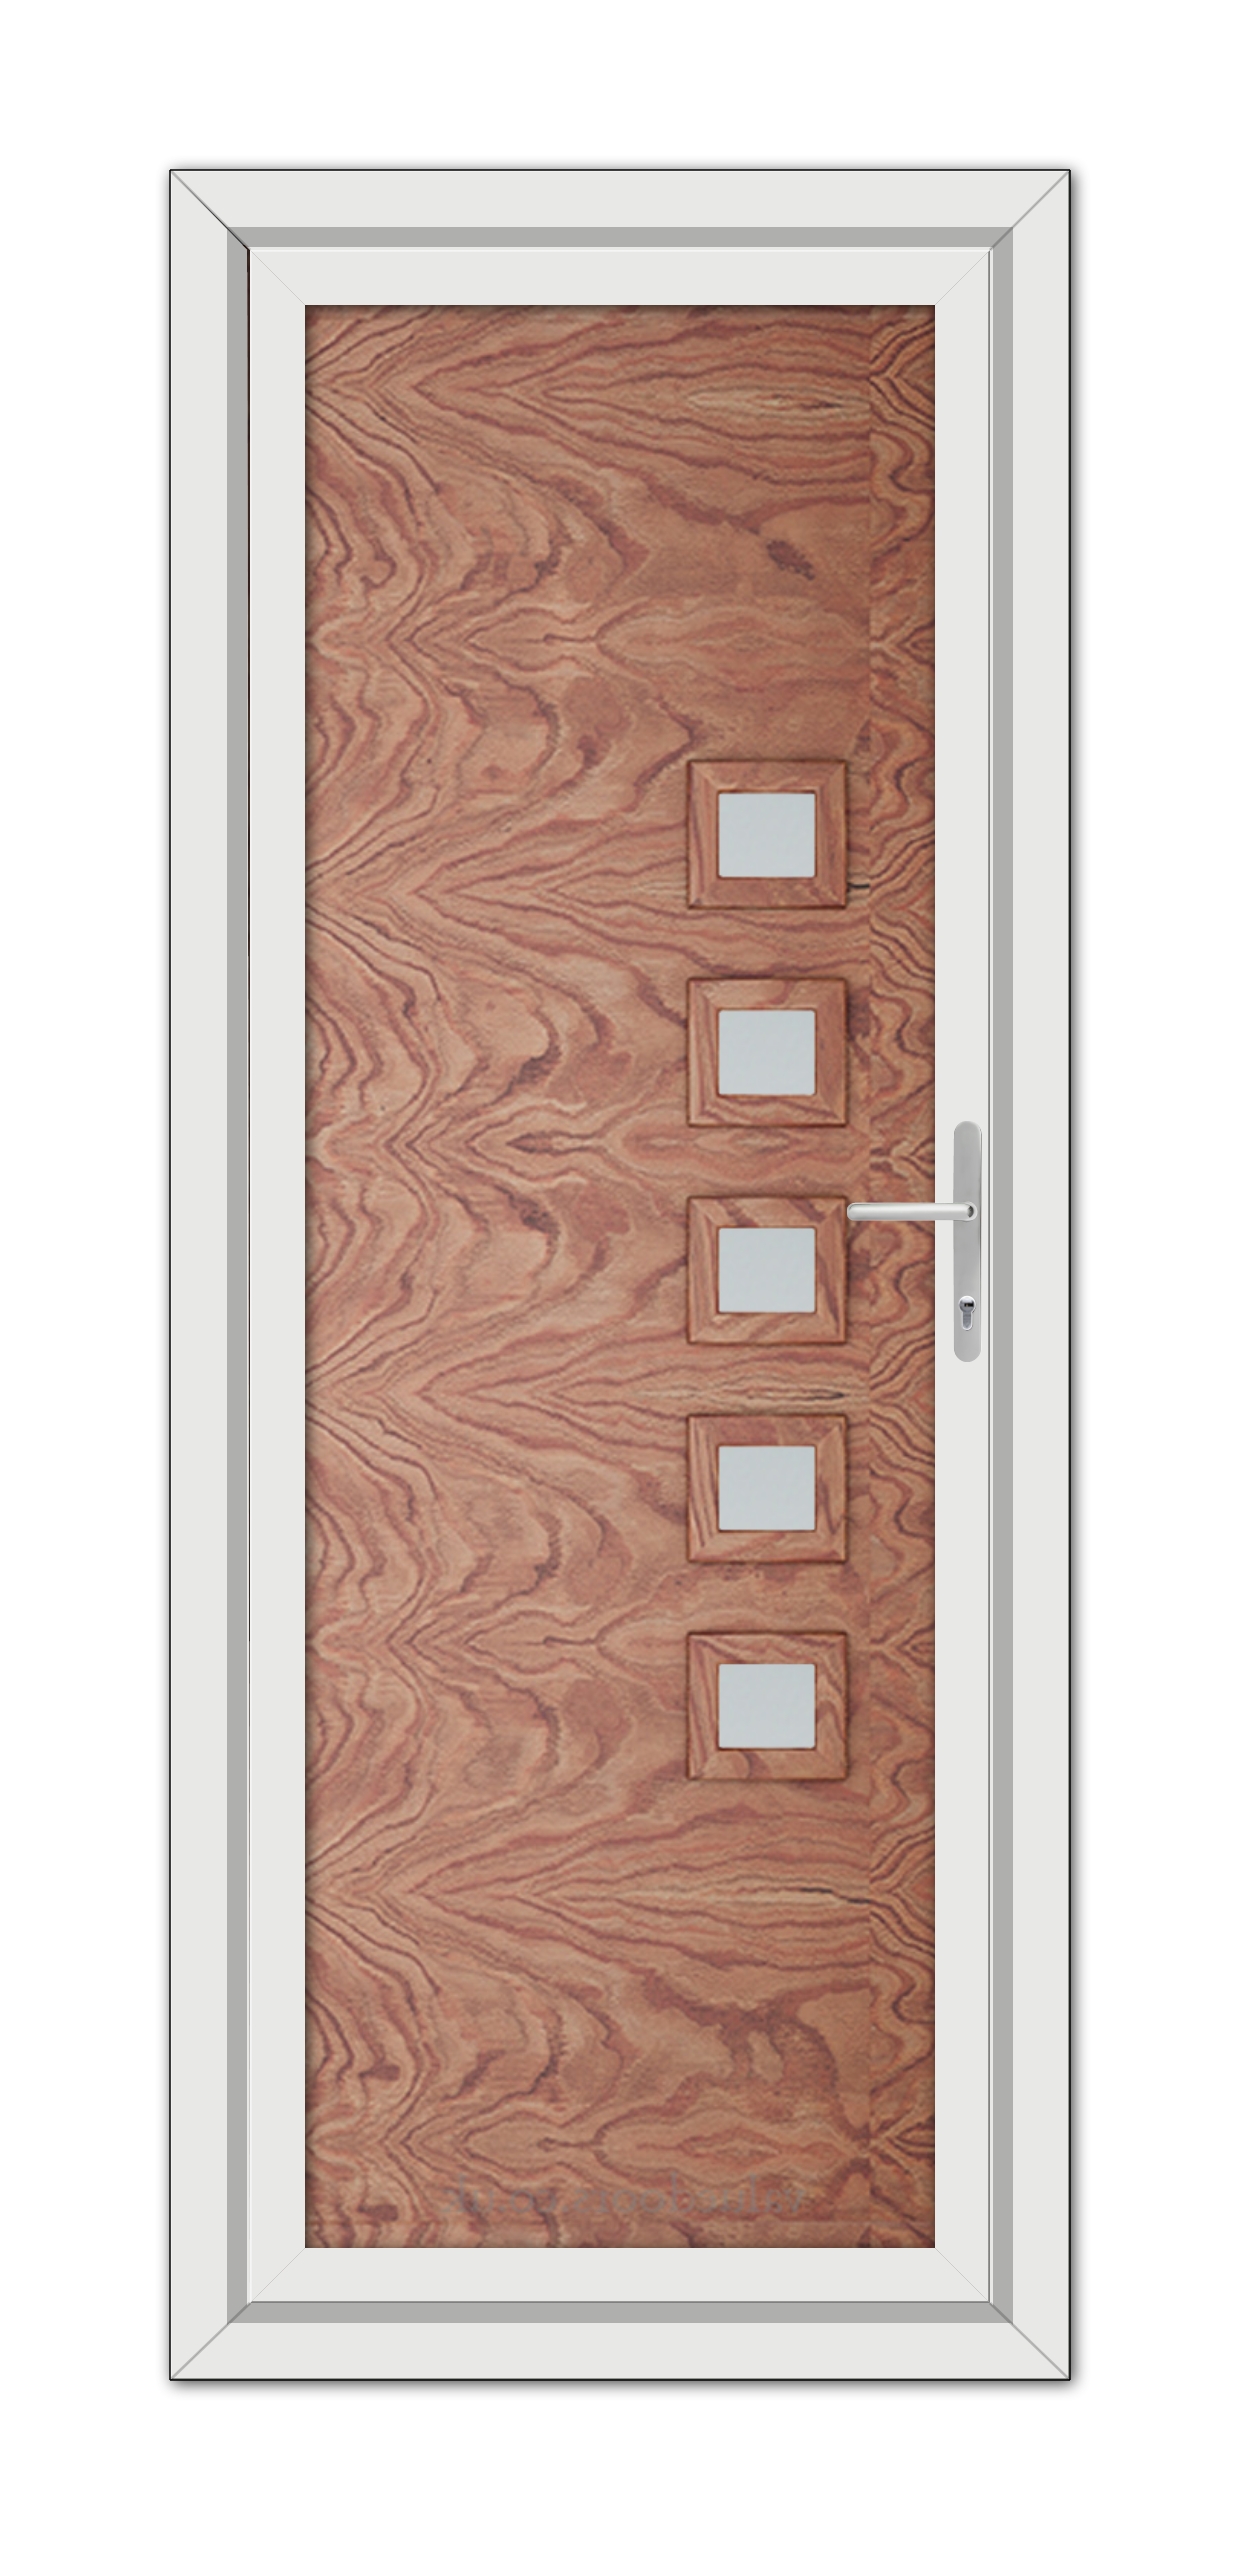 Modern Solid Oak Malaga uPVC door with six horizontal panels and a metal handle, framed in white.